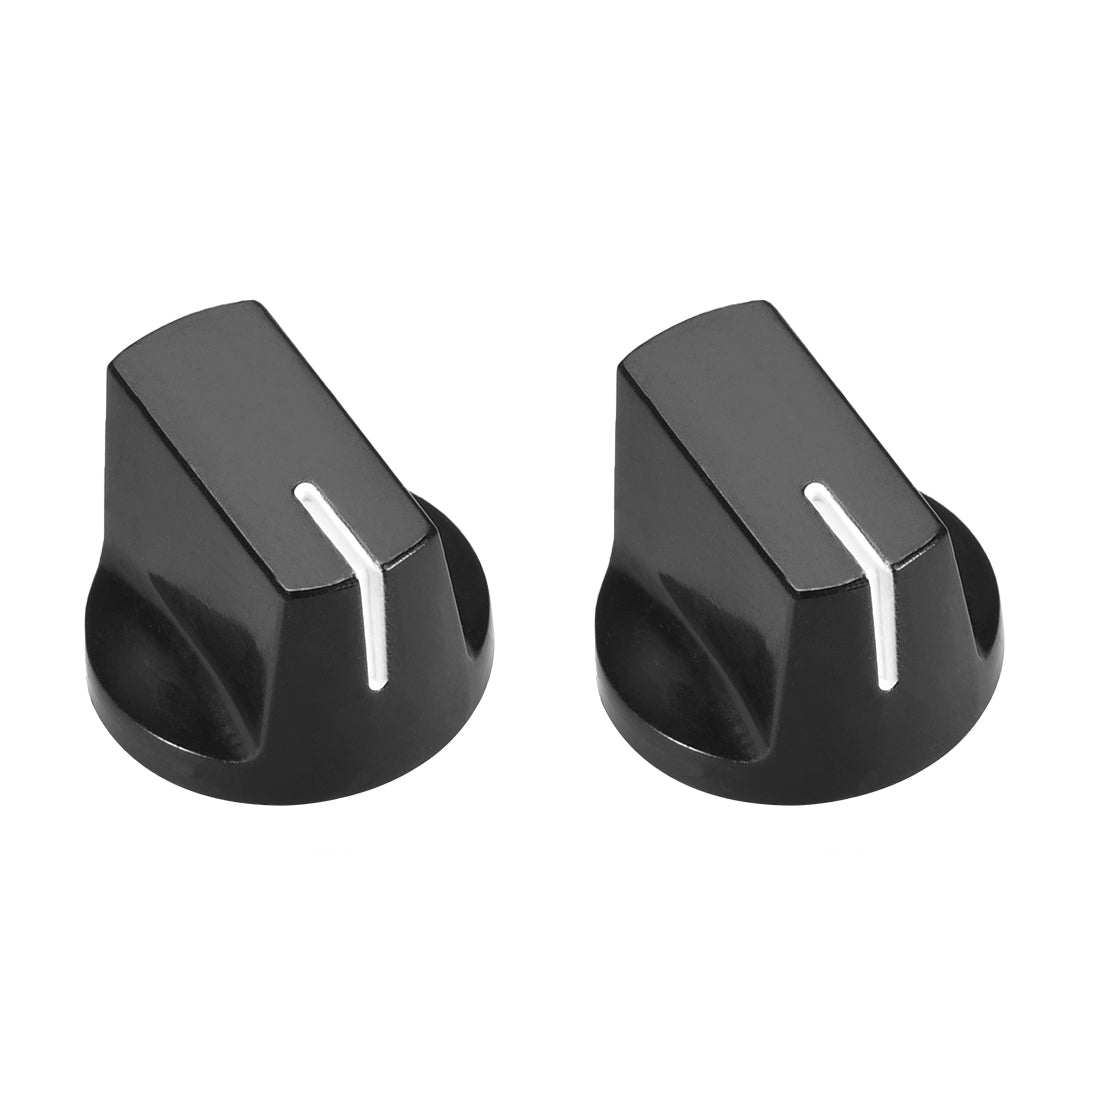 uxcell Uxcell 2pcs, 6.4mm Potentiometer Control Knobs For Electric Guitar Acrylic Volume Tone Knobs Black D Shaft